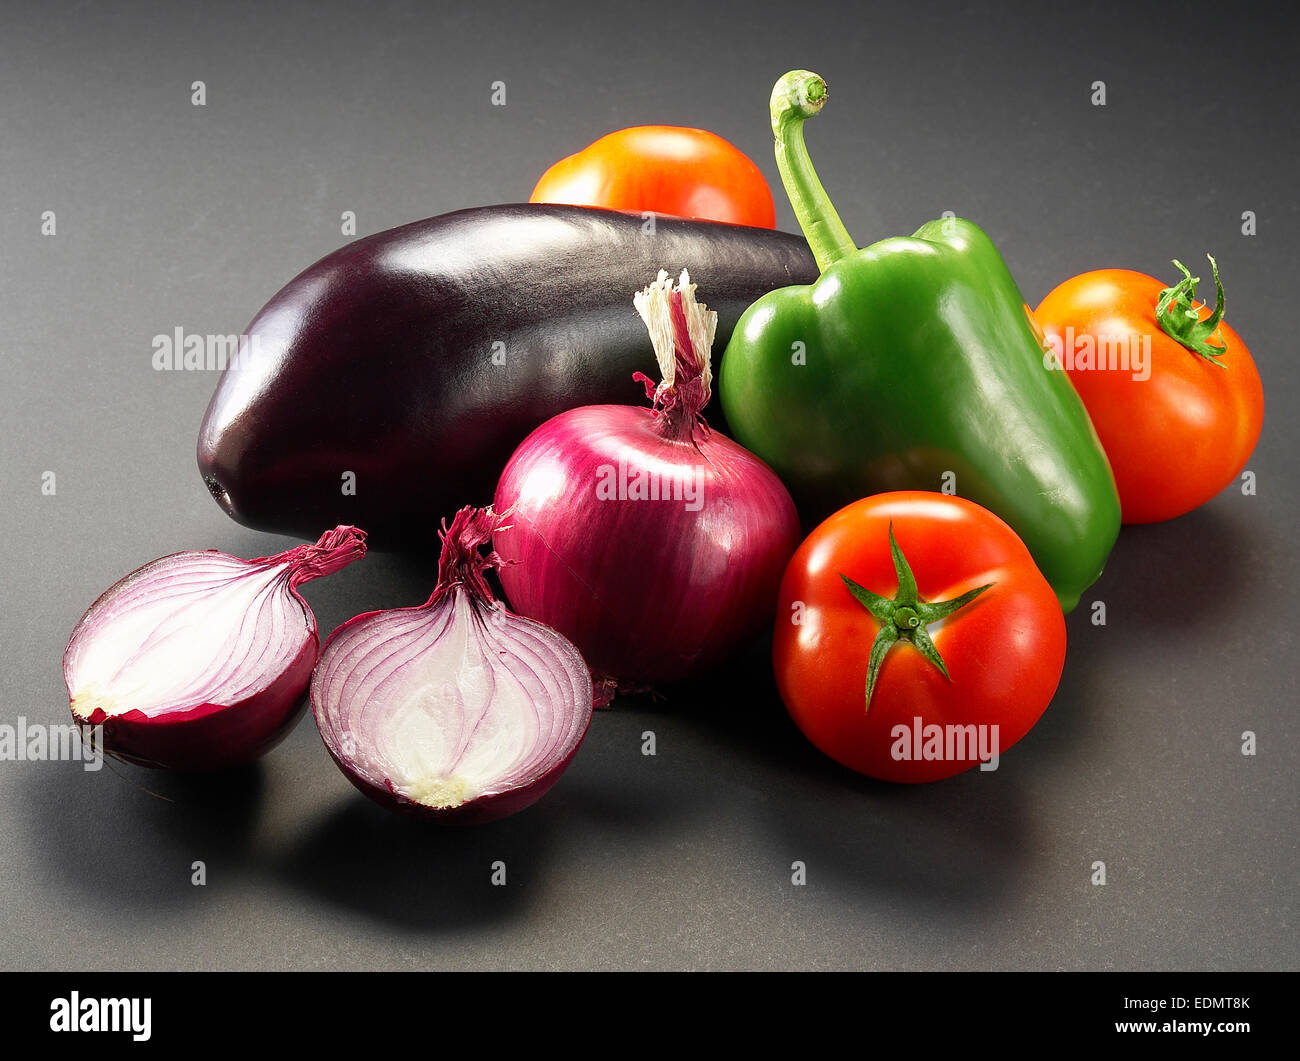 Still life photography of vegetables; peppers, onions, tomatoes, eggplant Stock Photo